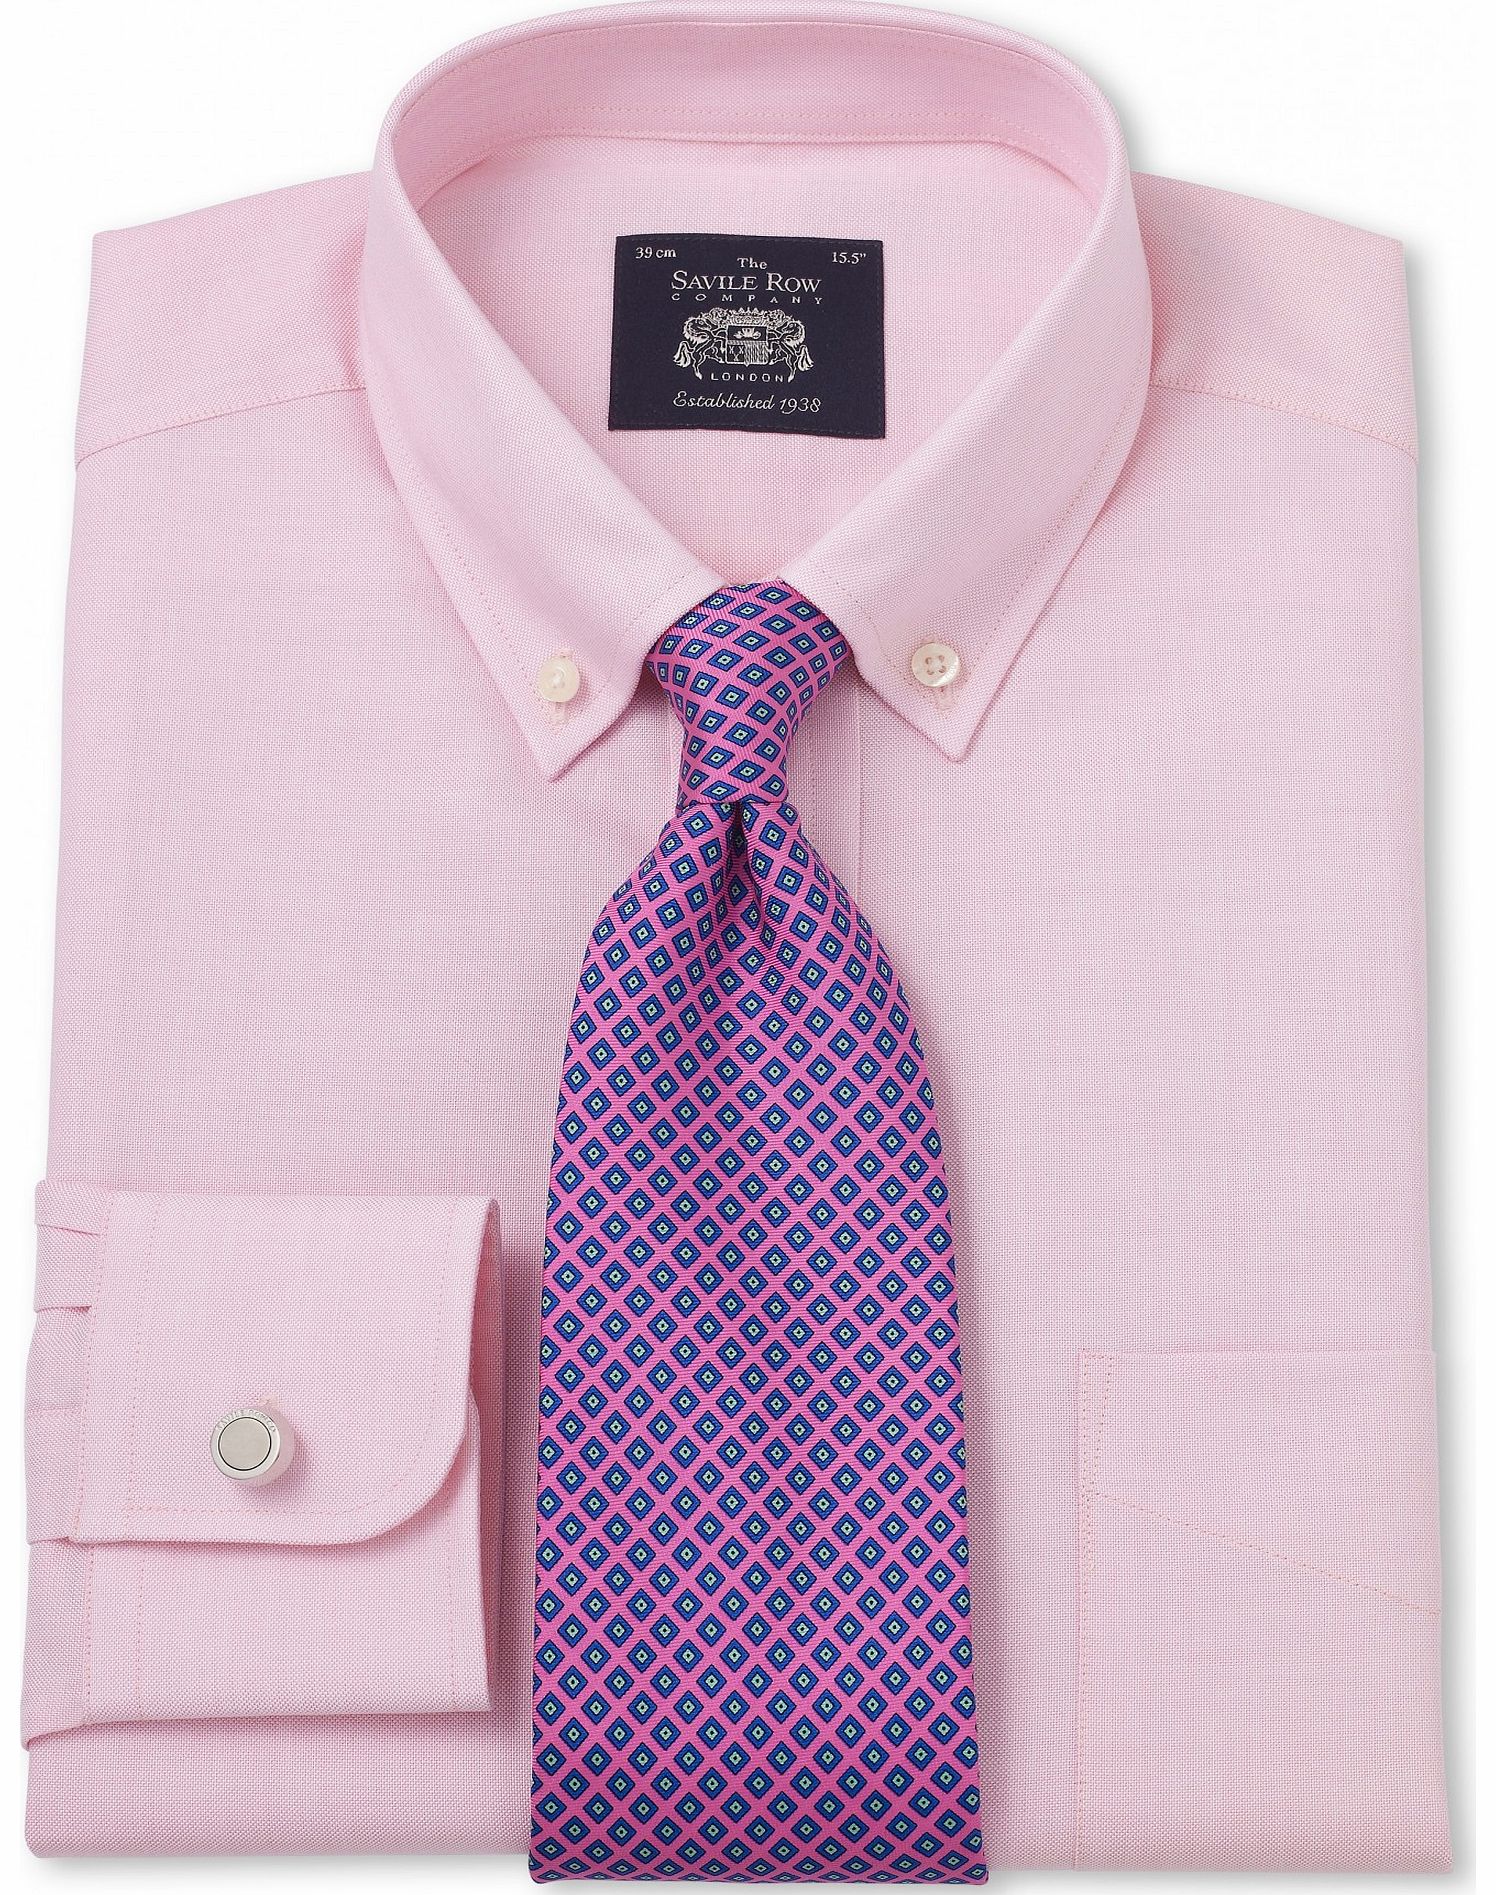 Savile Row Company Pink Pinpoint Classic Fit Shirt 16 1/2``